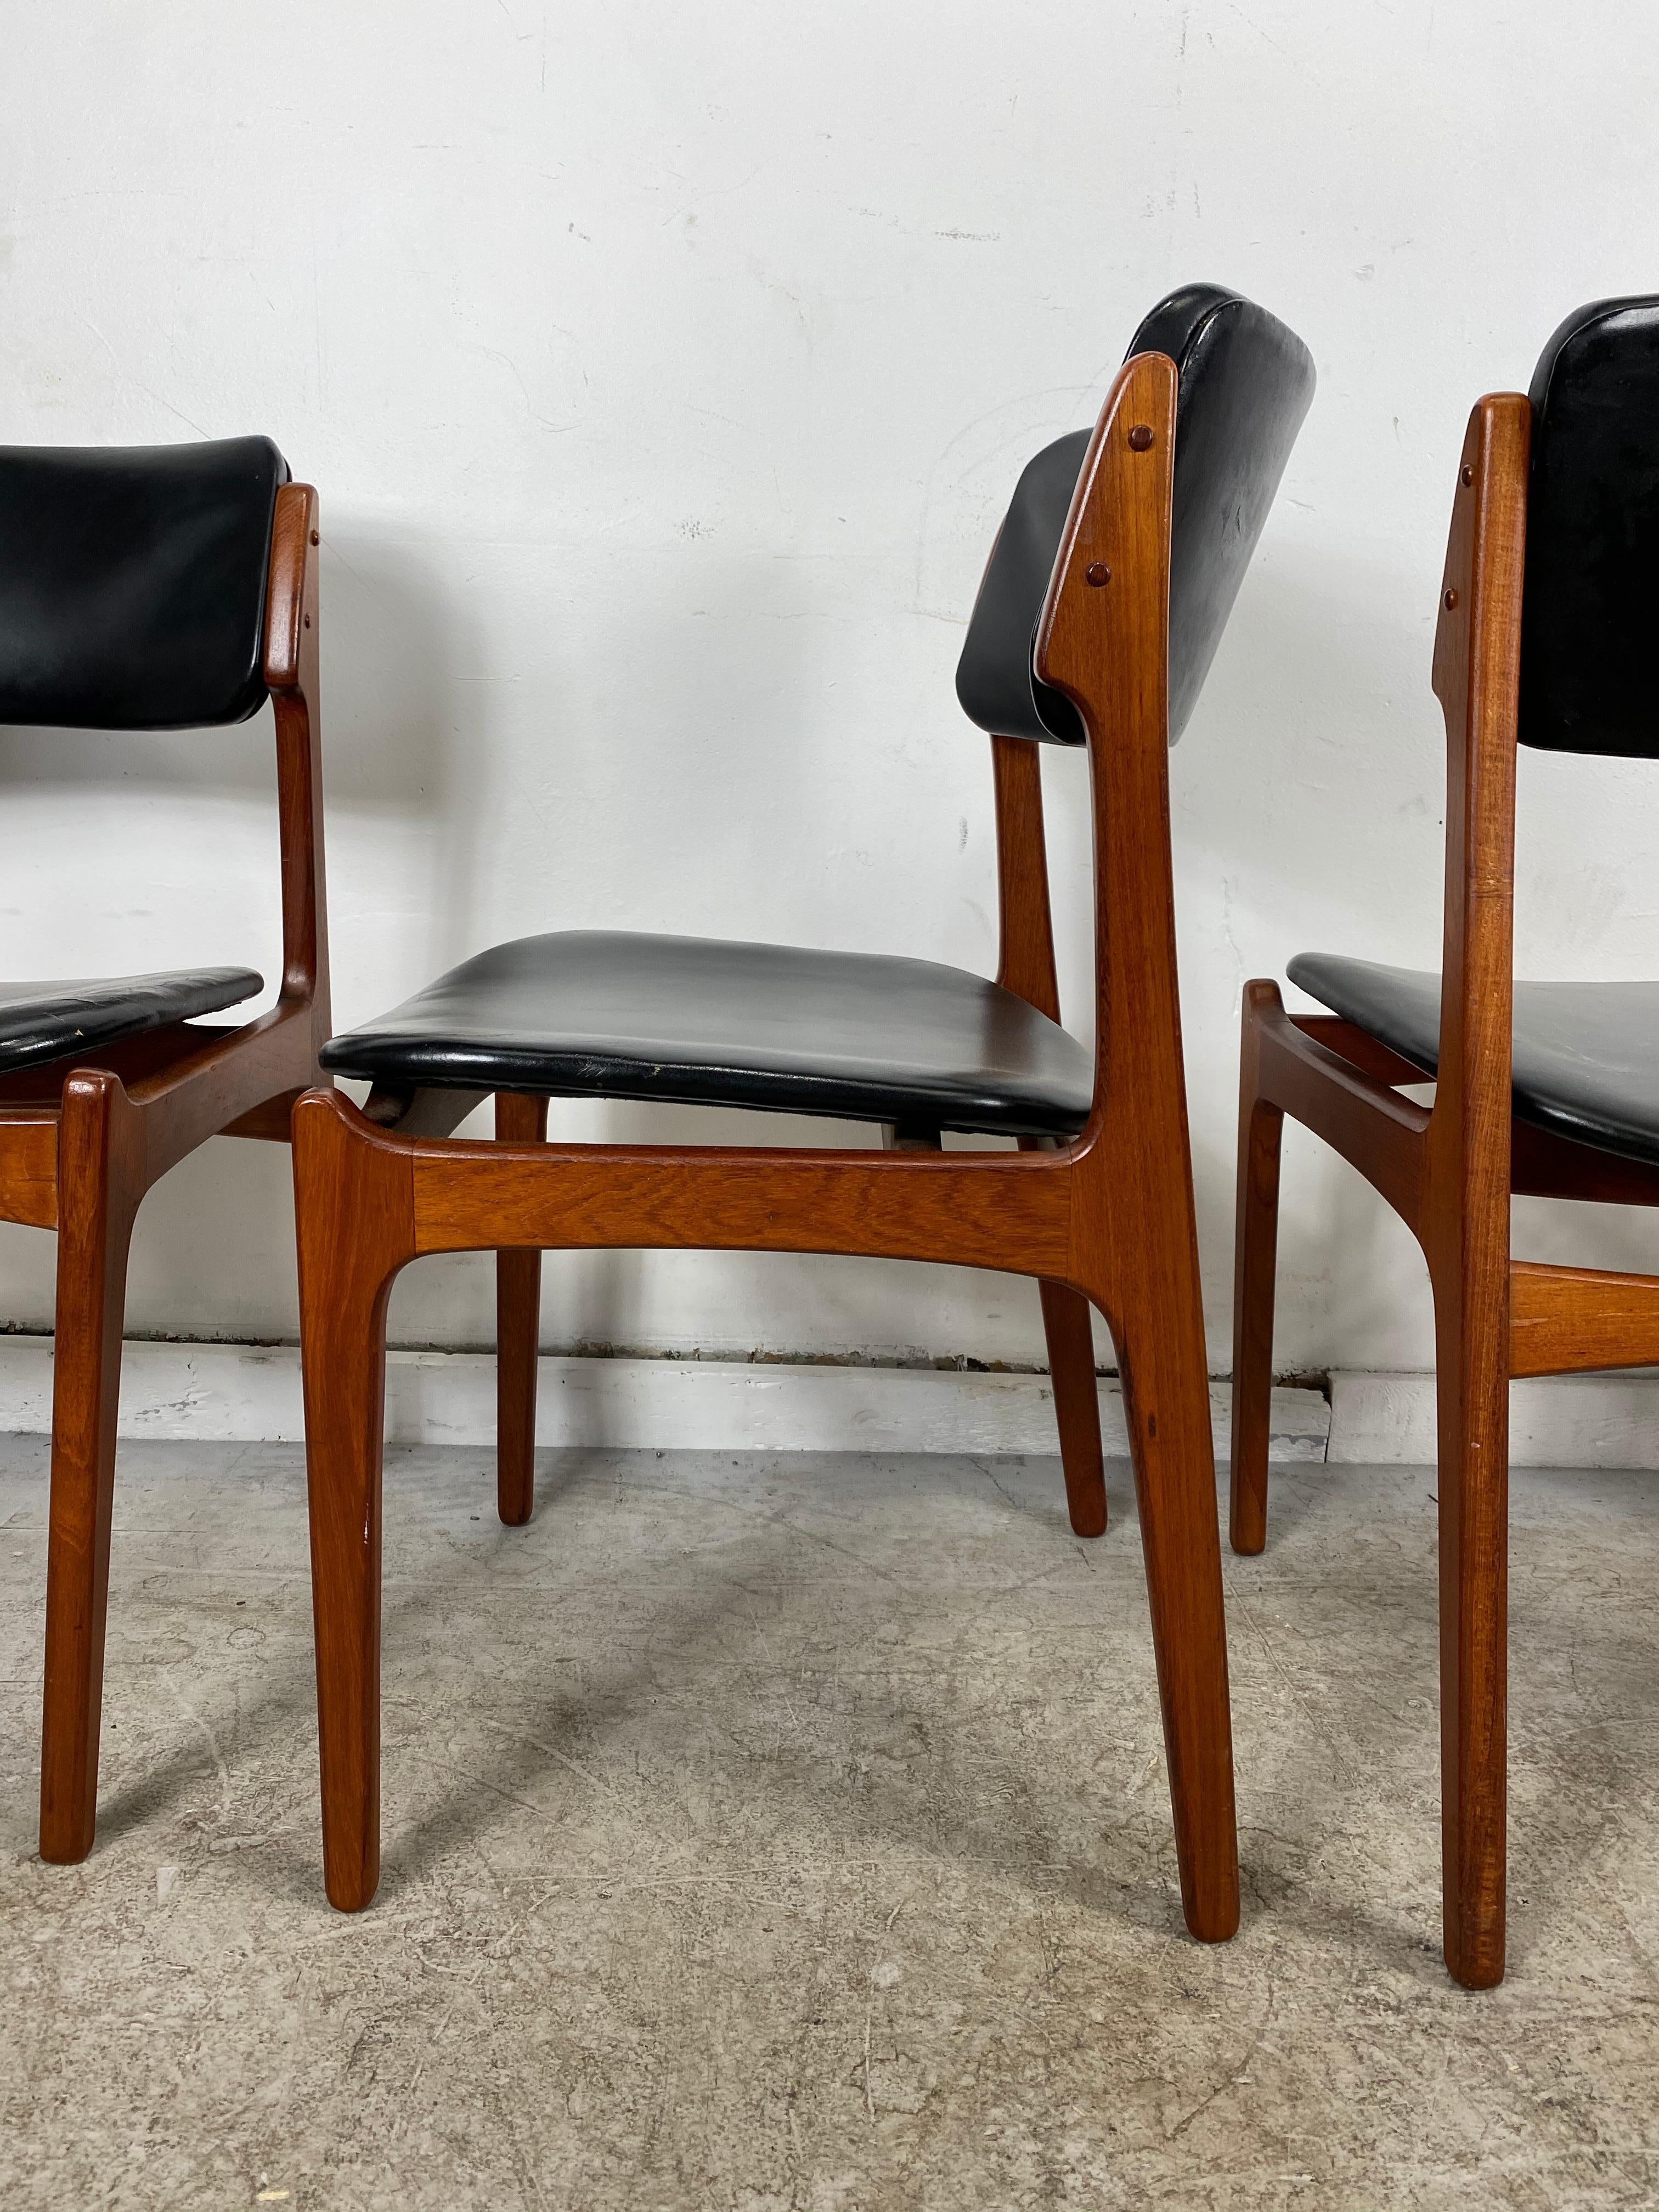 Nice set of four dining chairs model OD-49 designed by Erik Buck. Teak and original black leather. Produced by Oddense Maskinsnedkeri A/S in Denmark.